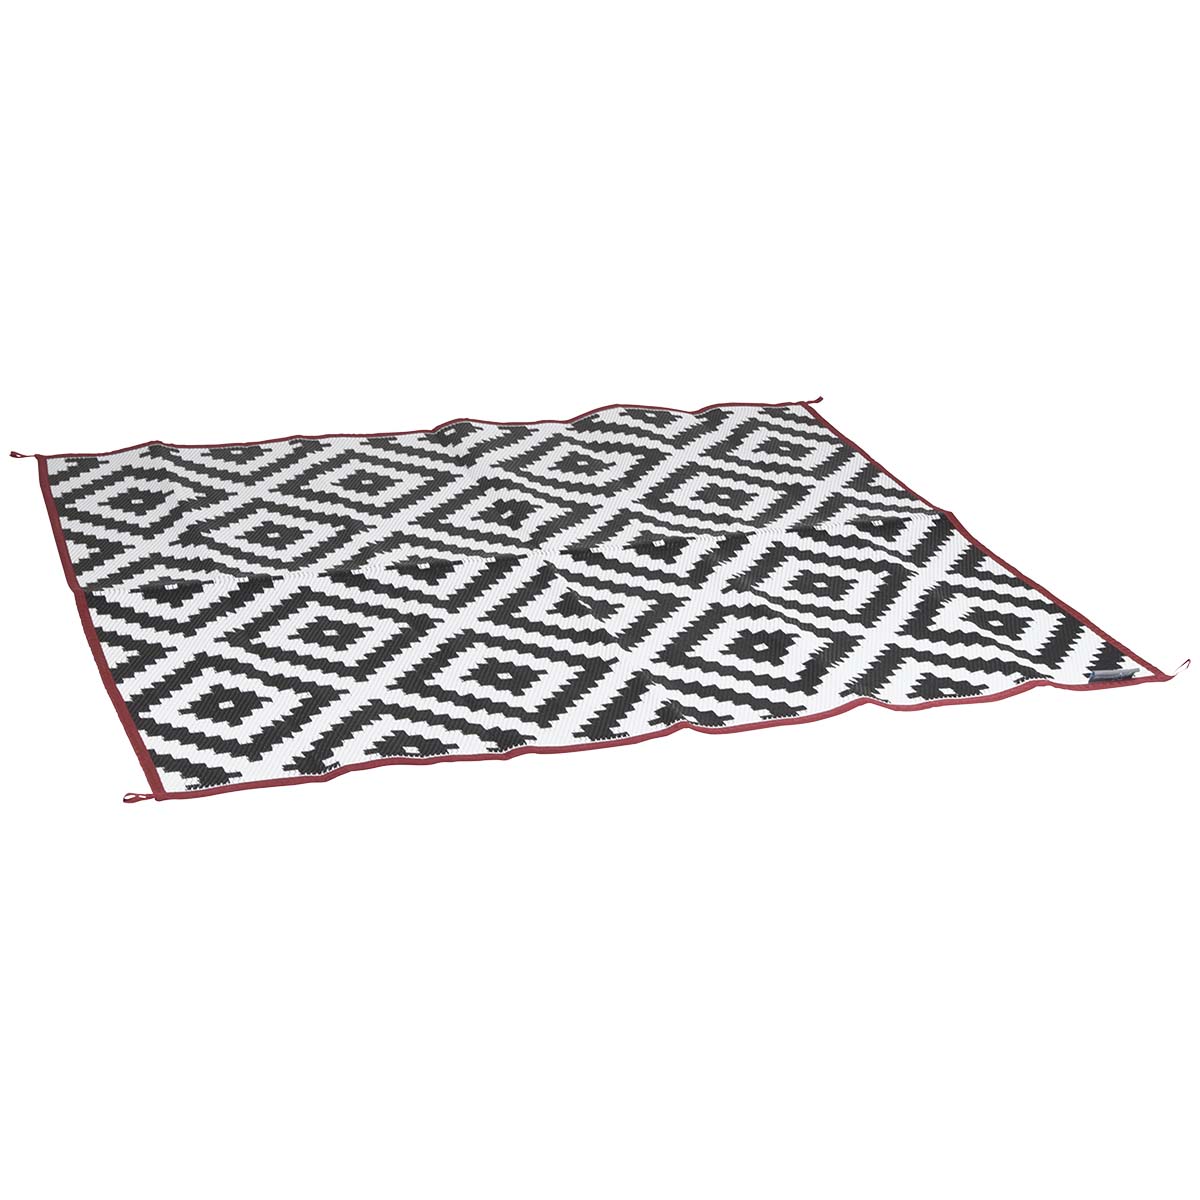 4271025 A very stylish carpet. Decorated on 2 sides, whereby this cloth can be used on both sides. The carpet is waterproof and mold resistant, therefore ideal as a picnic blanket, in the (front) tent, under the porch, on the beach, in the garden or in the park. Made from high quality and lightweight 100% polypropylene 380 gr/m². This carpet has an extended lifespan due to the UV treatment. Comes in a handy carry bag.